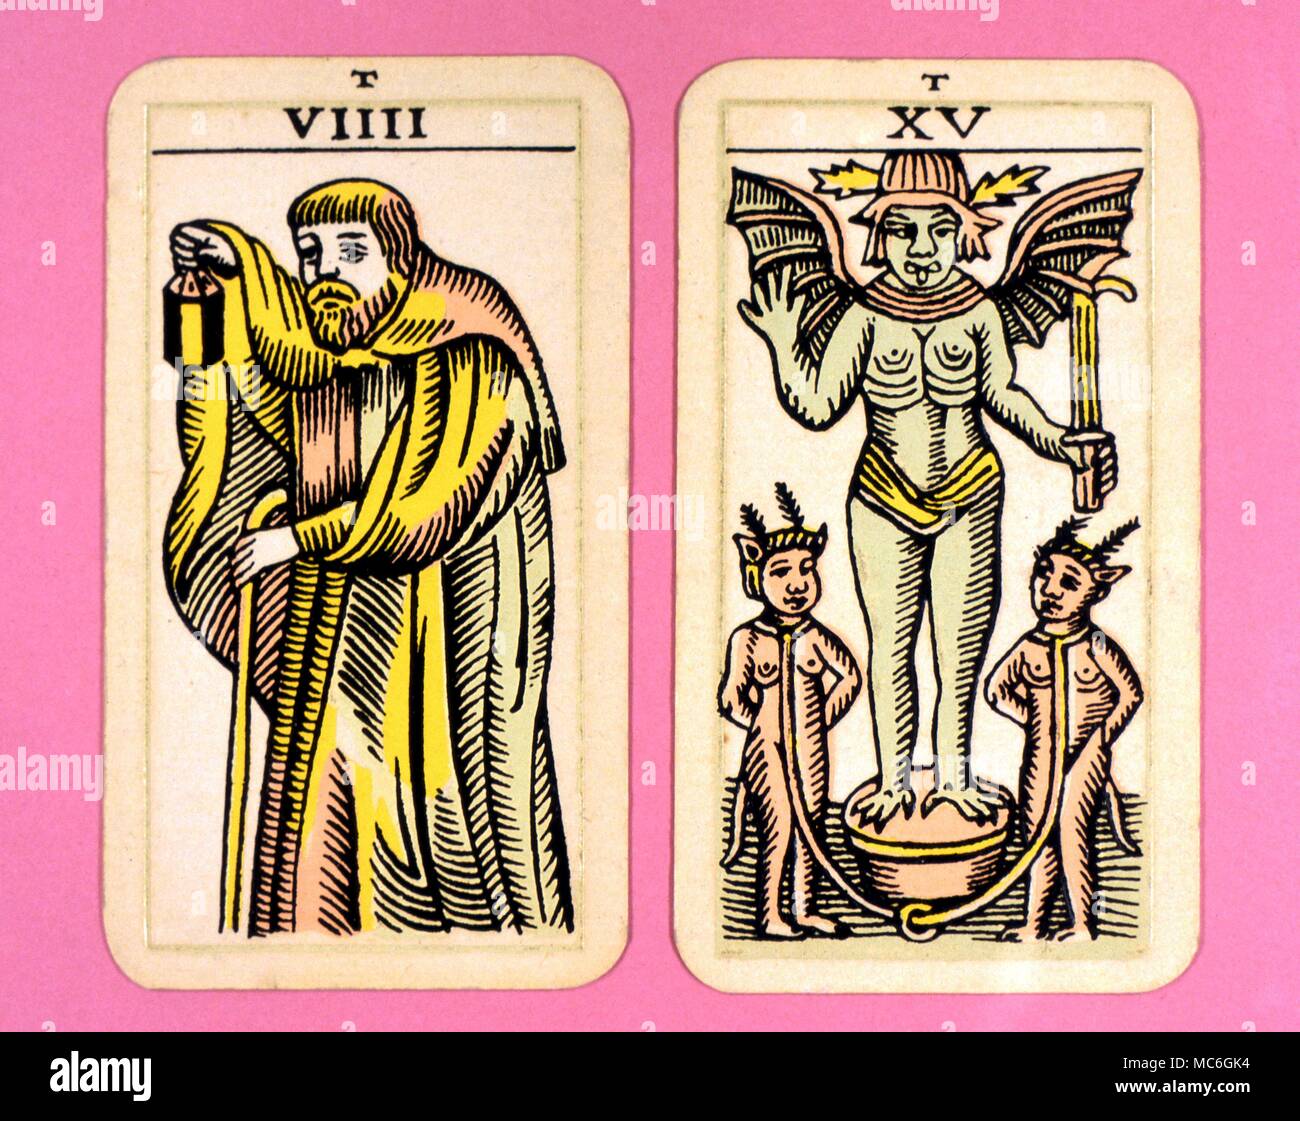 Tarot Cards-Majo Arcana- The Parisian Tarot. Card 9, The Hermit, and Card 15. The Devil Two cards from a Major Arcana picture Tarot, probably designed in an archaizing style in loose imitation of the Rosicrucian deck designed by Pamela Coleman Smith, alongside A.E.Waite, and various earlier decks, such as that published by Encausse (Papus) in The Tarot of the Bohemians at the end of the 19th century, post 1905, but earlier than 1912. The name Parisian Tarot was given by the owner of the deck - it might however be called the Tau Tarot, from the intriguing letter Tau at the head of each card. Stock Photo